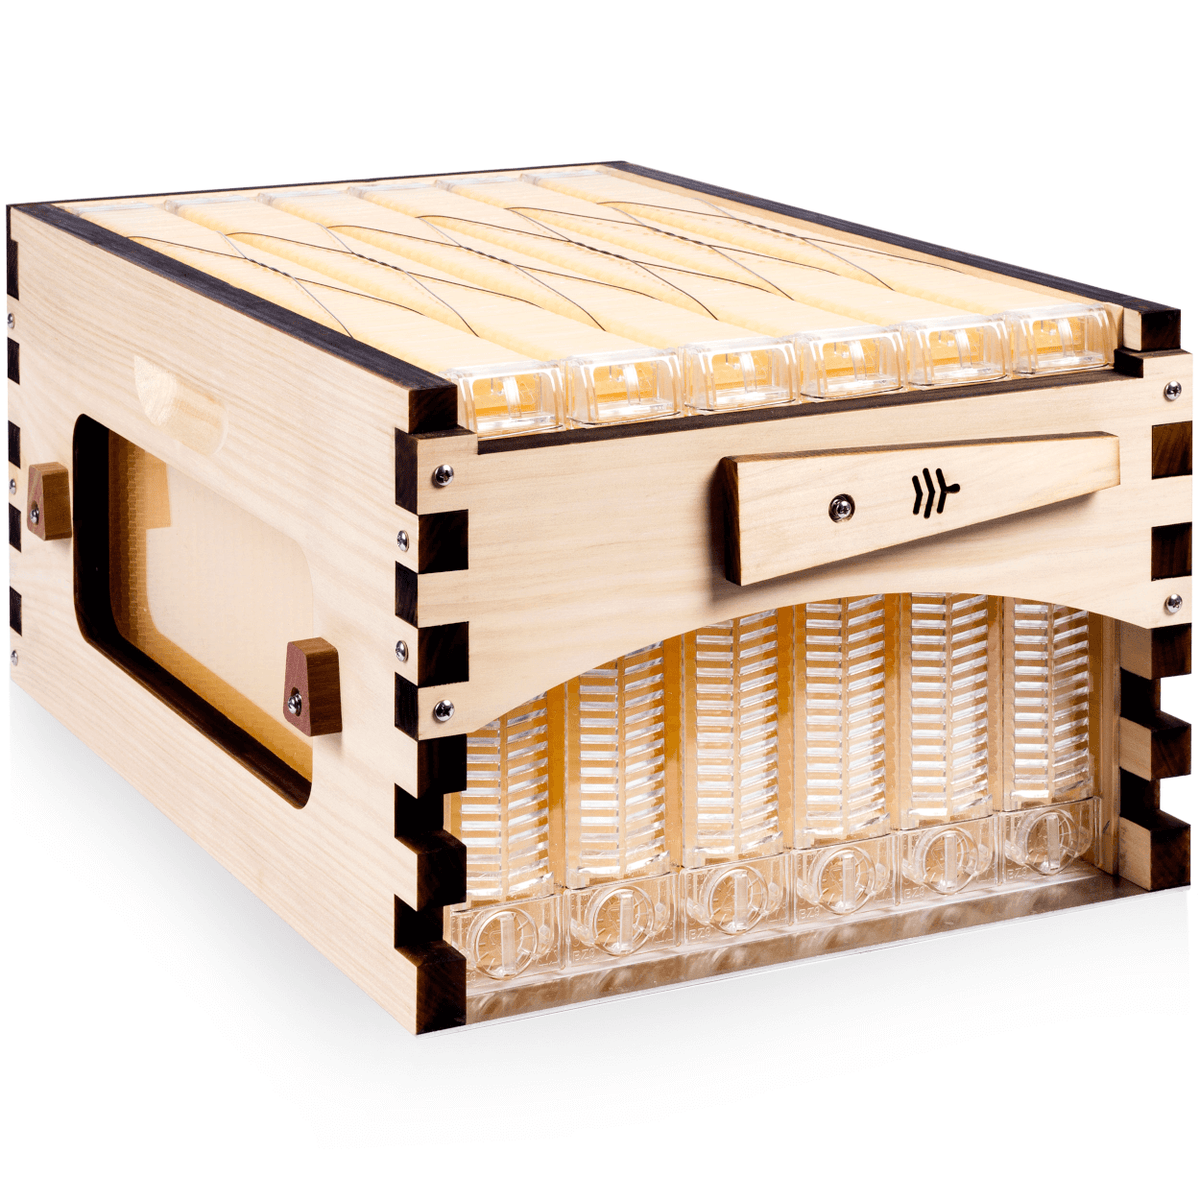 Flow Multifunctional Tray - Flow Hive US